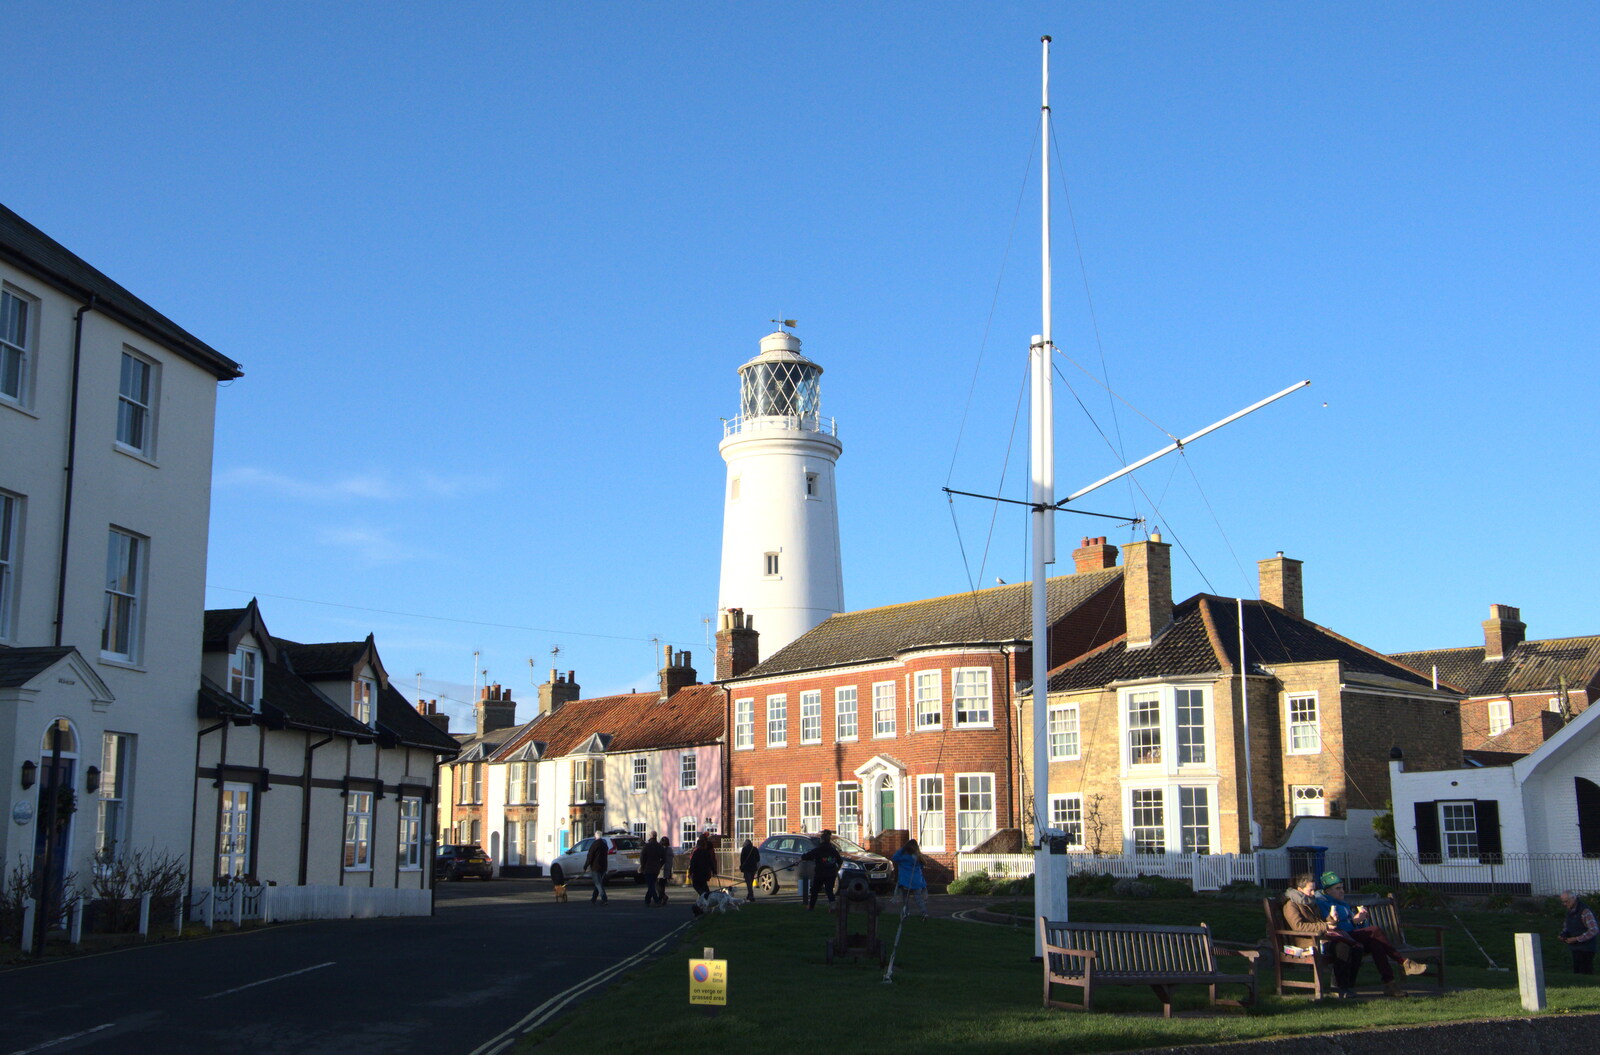 The lighthouse on St. James Green from A Return to the Beach, Southwold, Suffolk - 20th December 2020